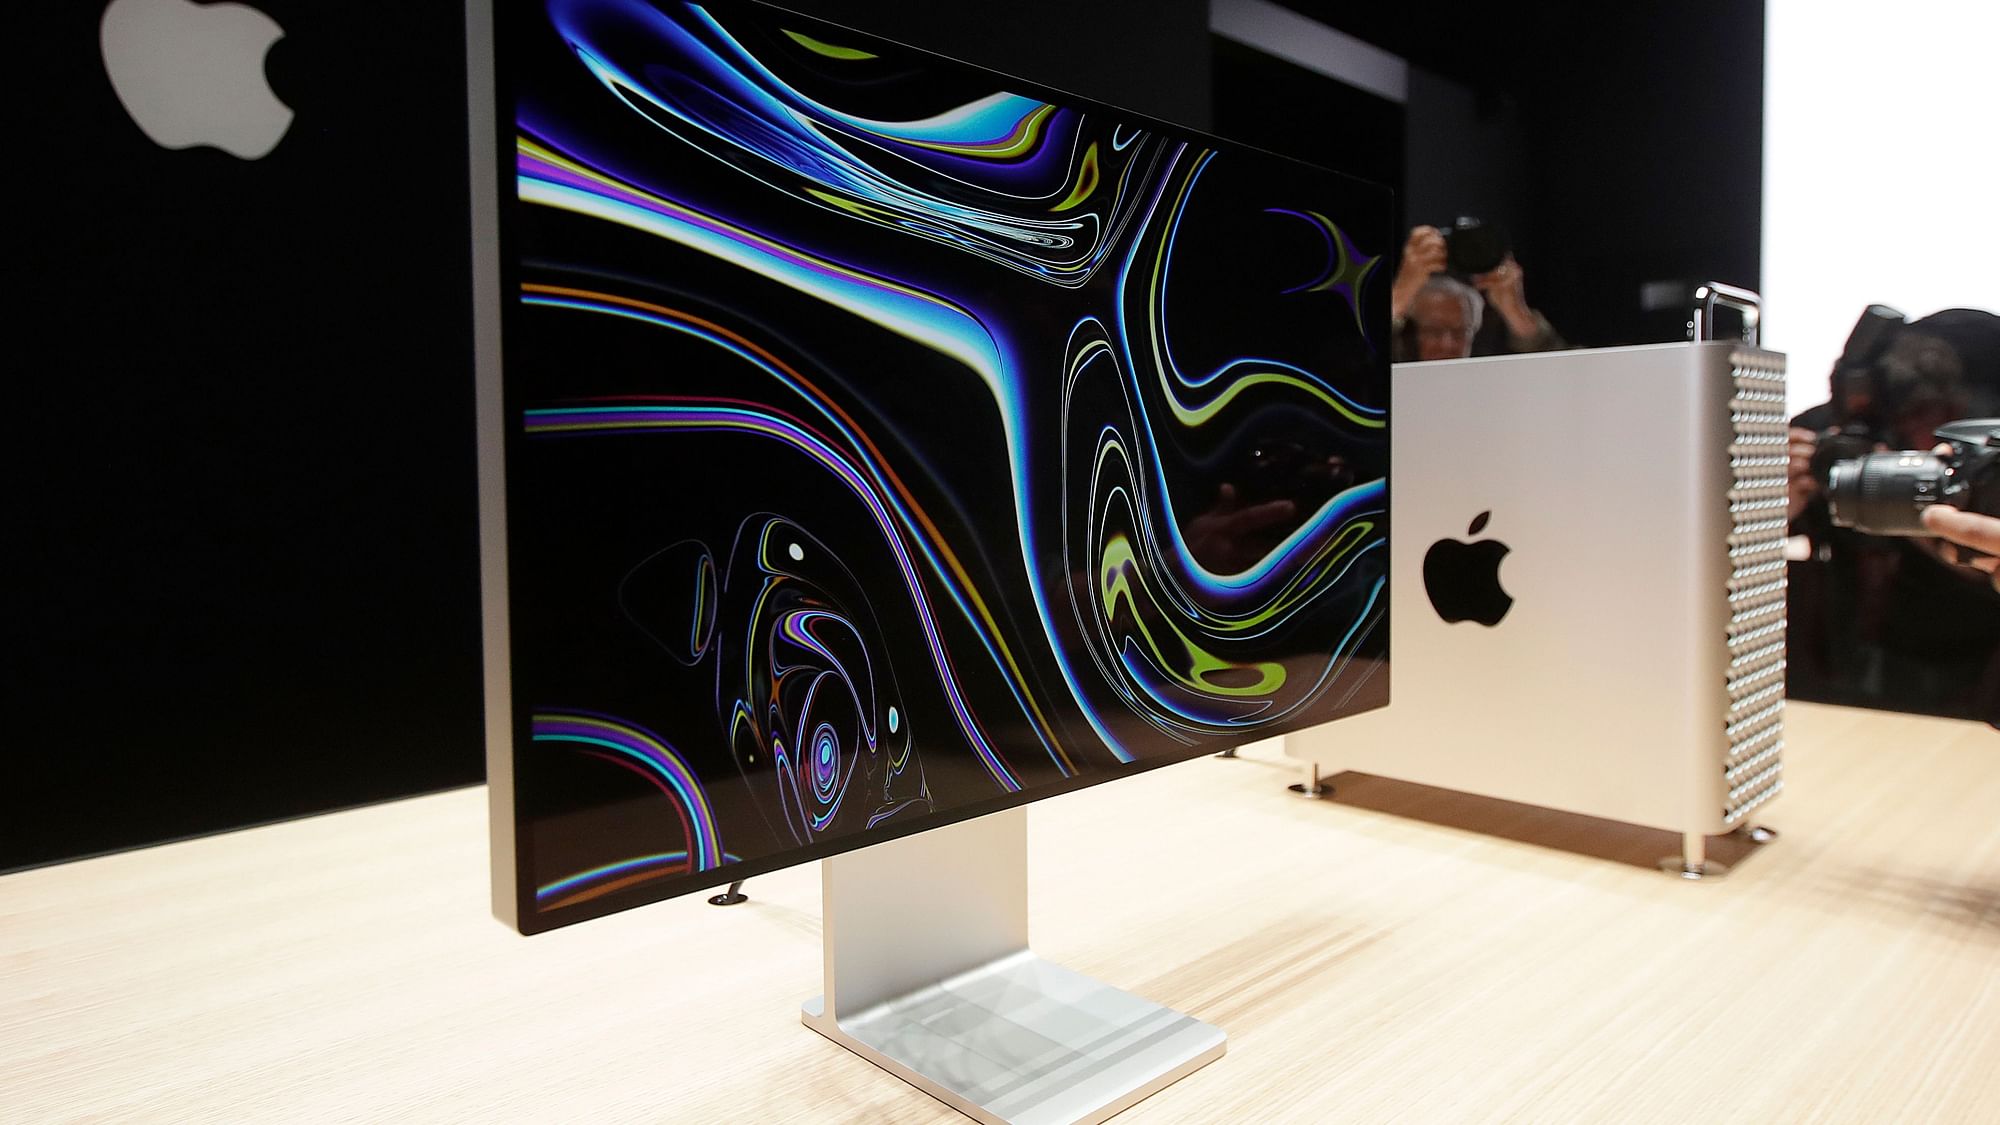 The Mac Pro CPU, along with the 32-inch Pro Display XDR monitor.